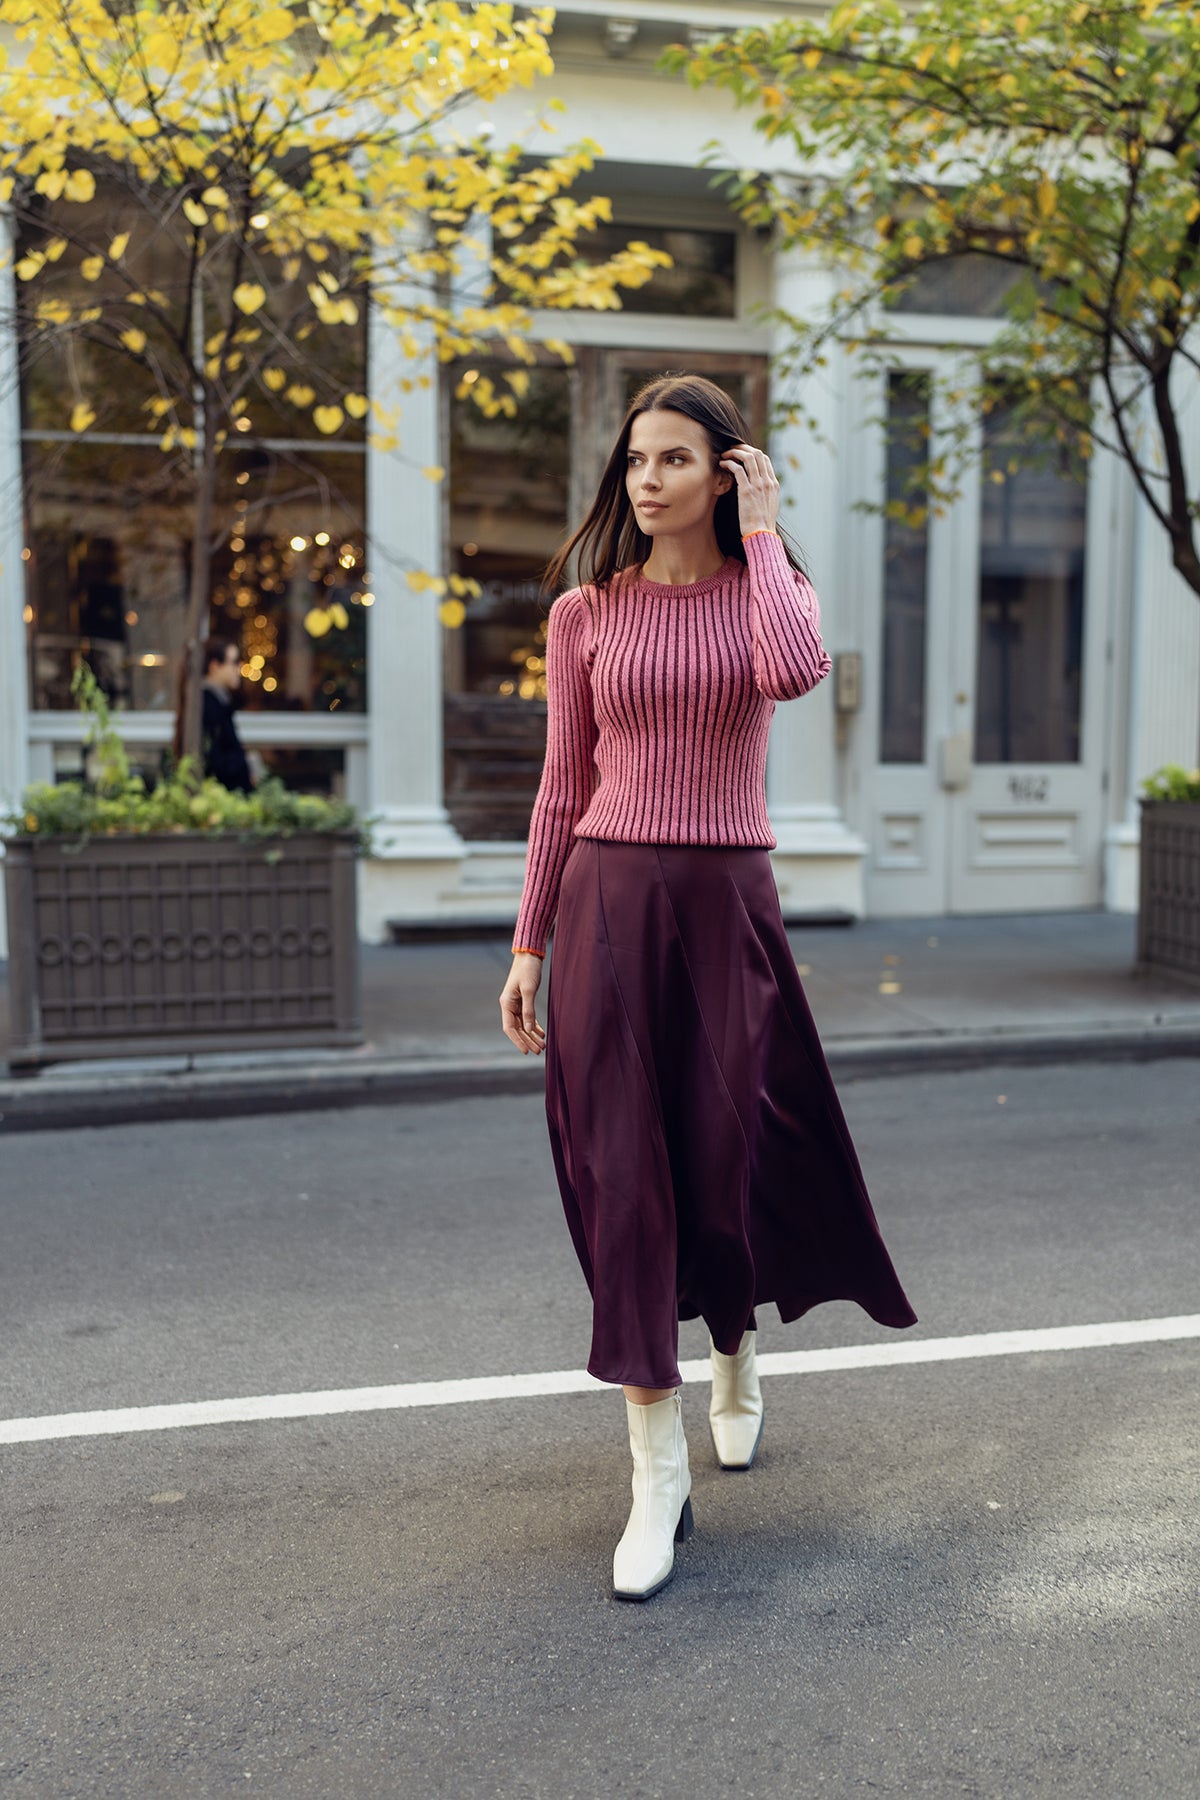 TWO TONE RIBBED SWEATER-PINK